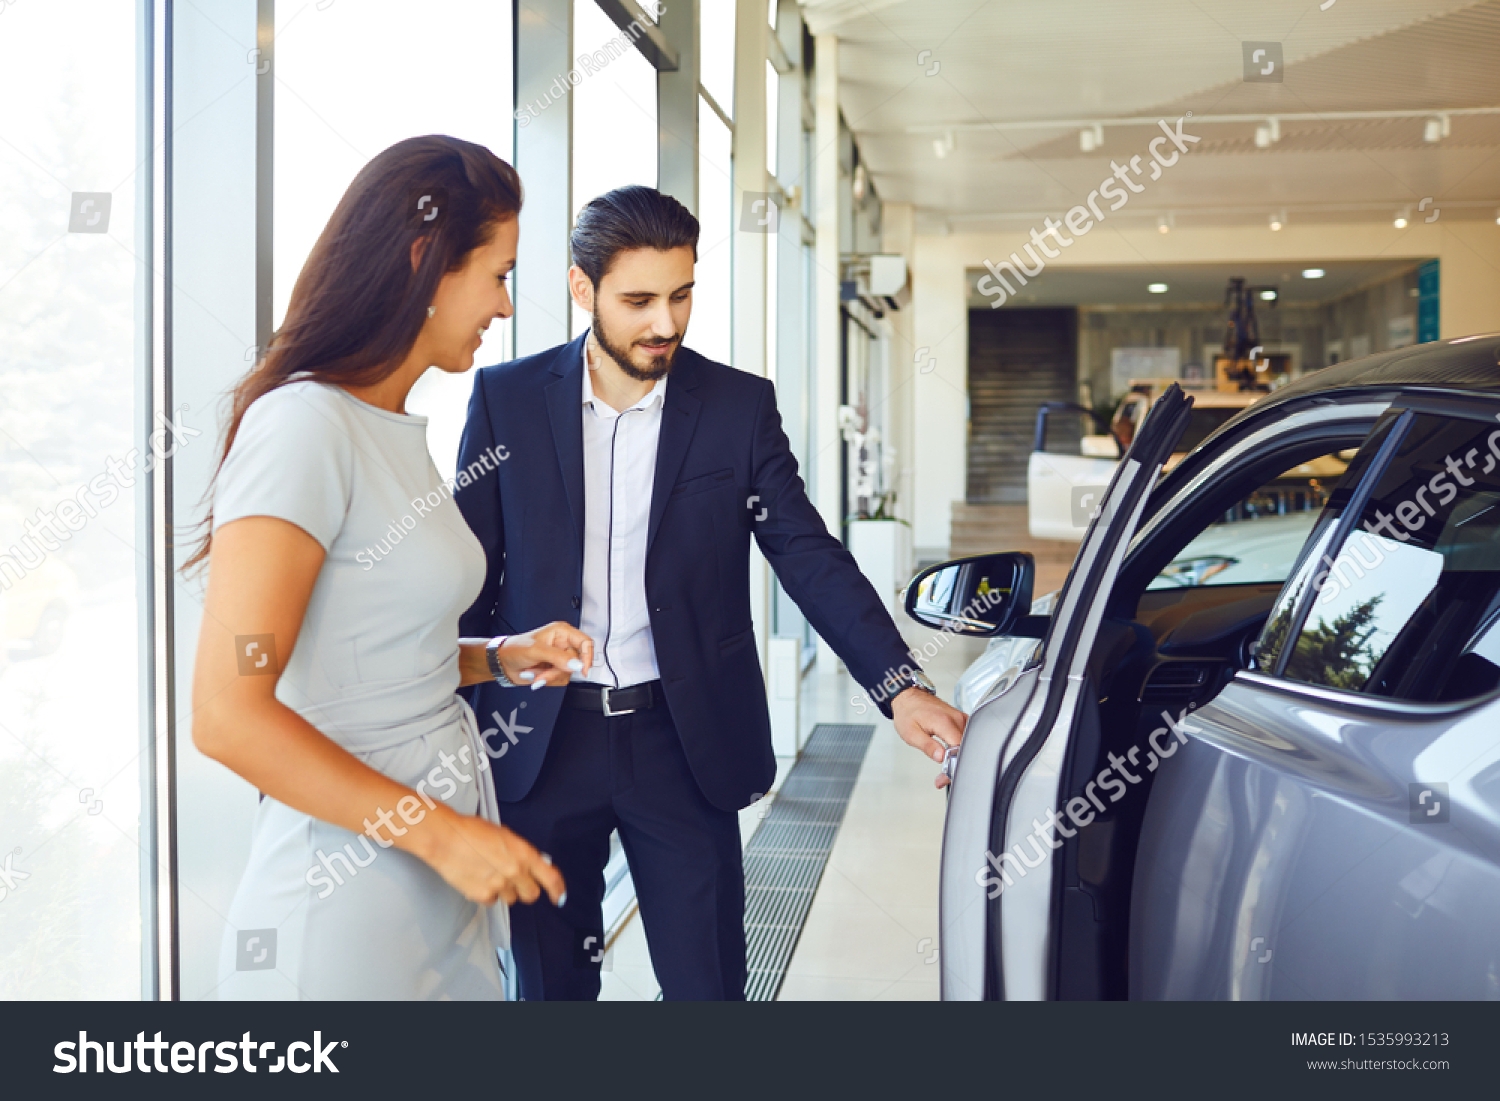 A young woman buys a new car in an auto salon #1535993213